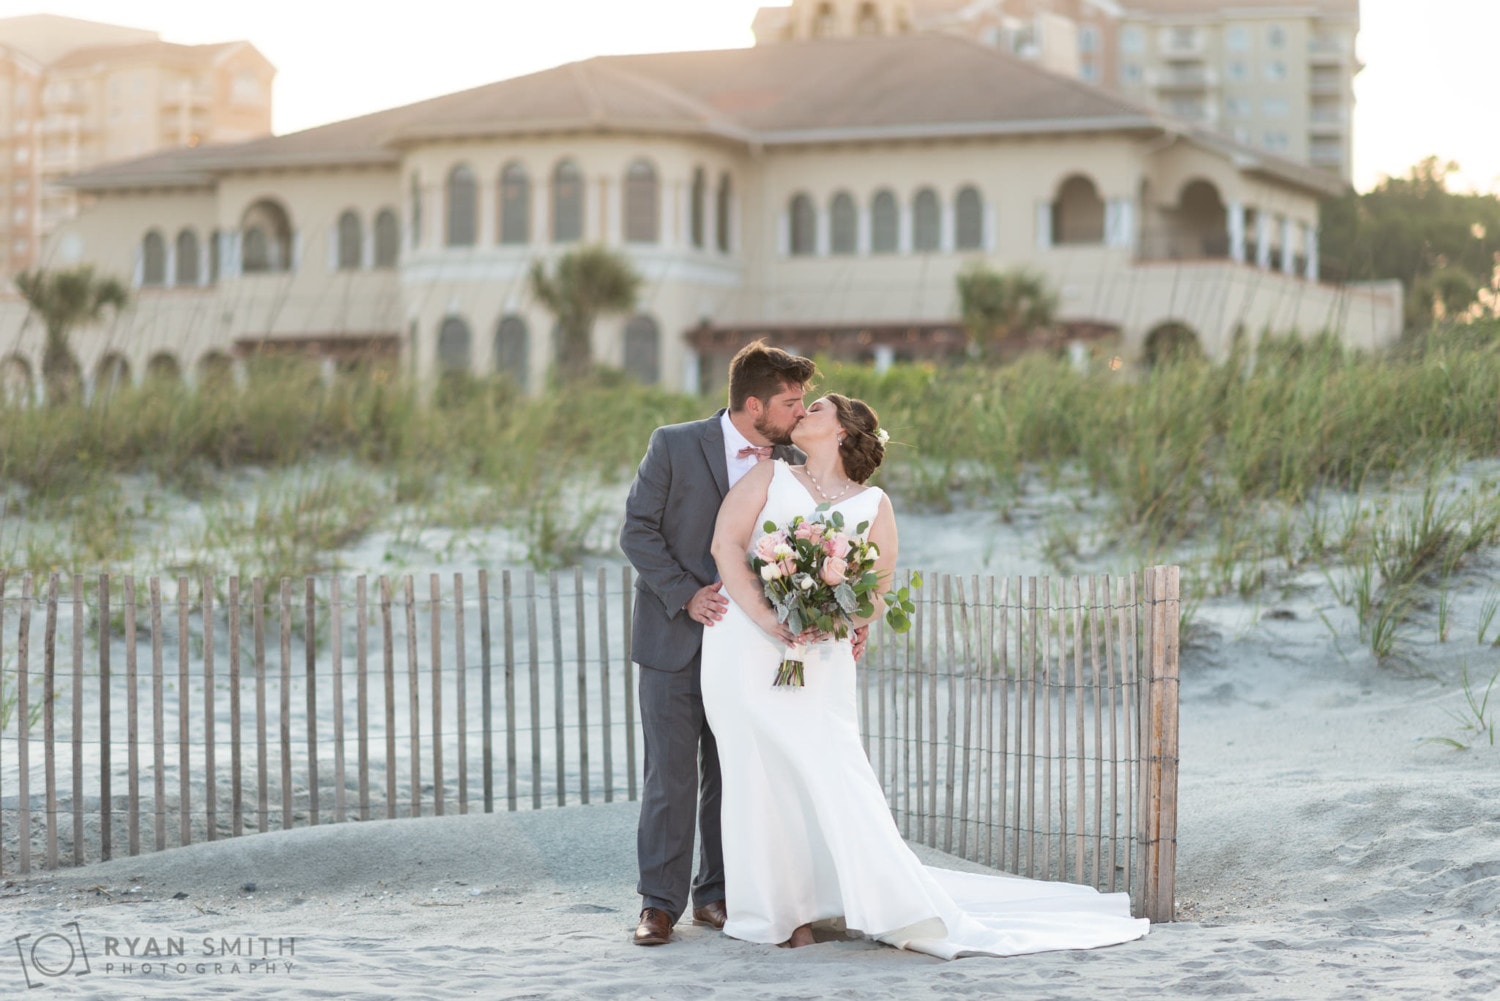 Bride and groom with sunset and clubhouse in the background - Grande Dunes Ocean Club - Myrtle Beach